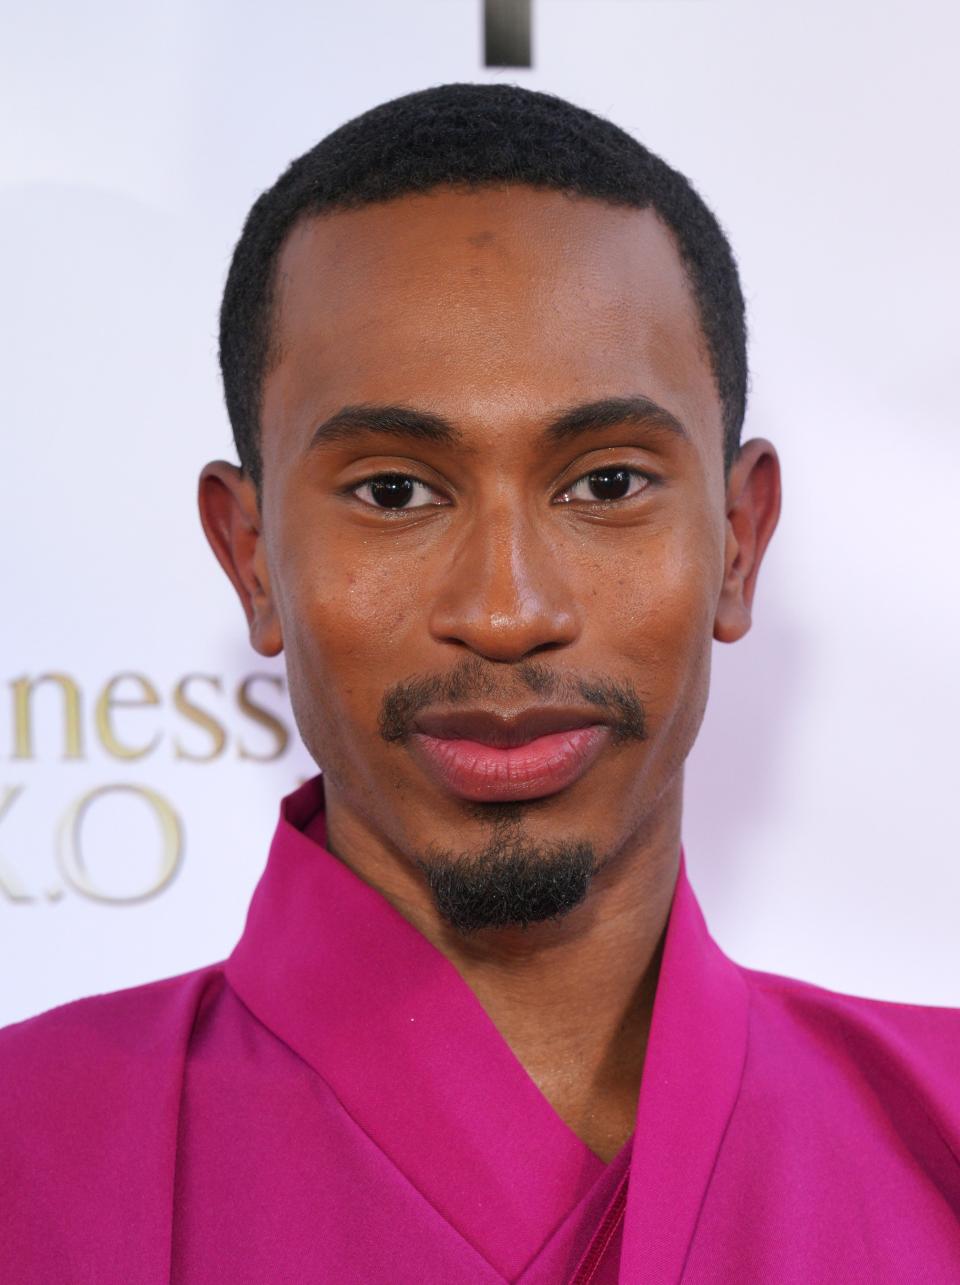 Kalen in a stylish pink suit jacket posing at a celebrity event